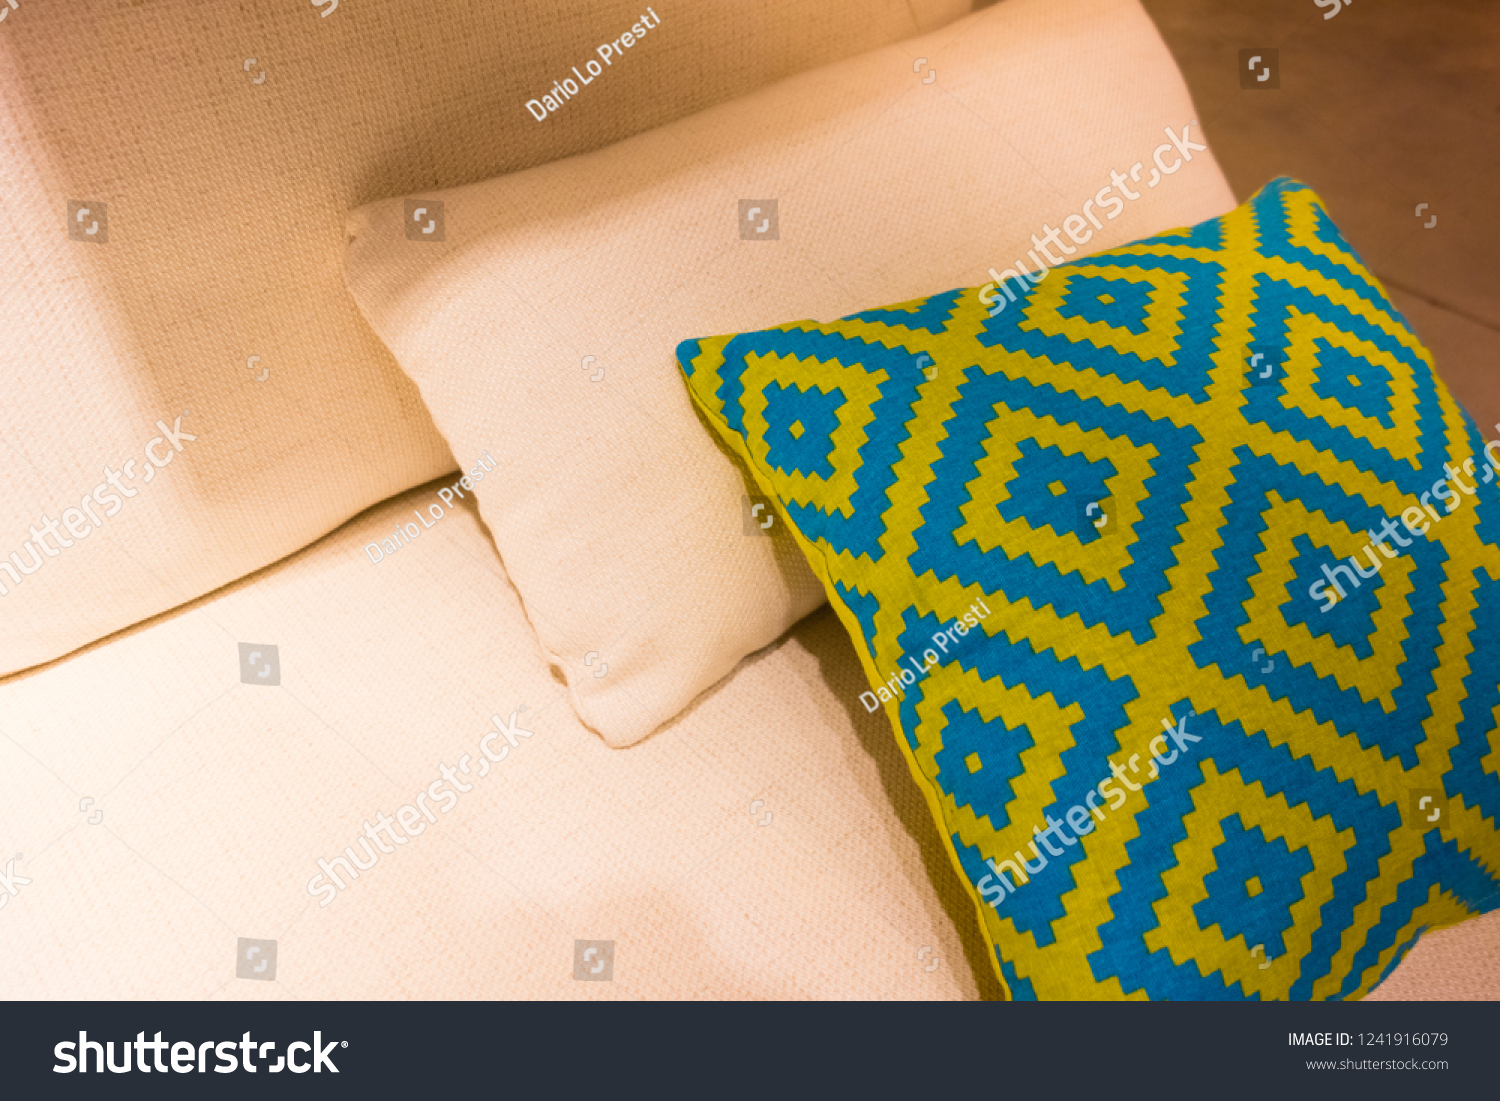 some cozy pillows on a cozy sofa in an apartment #1241916079